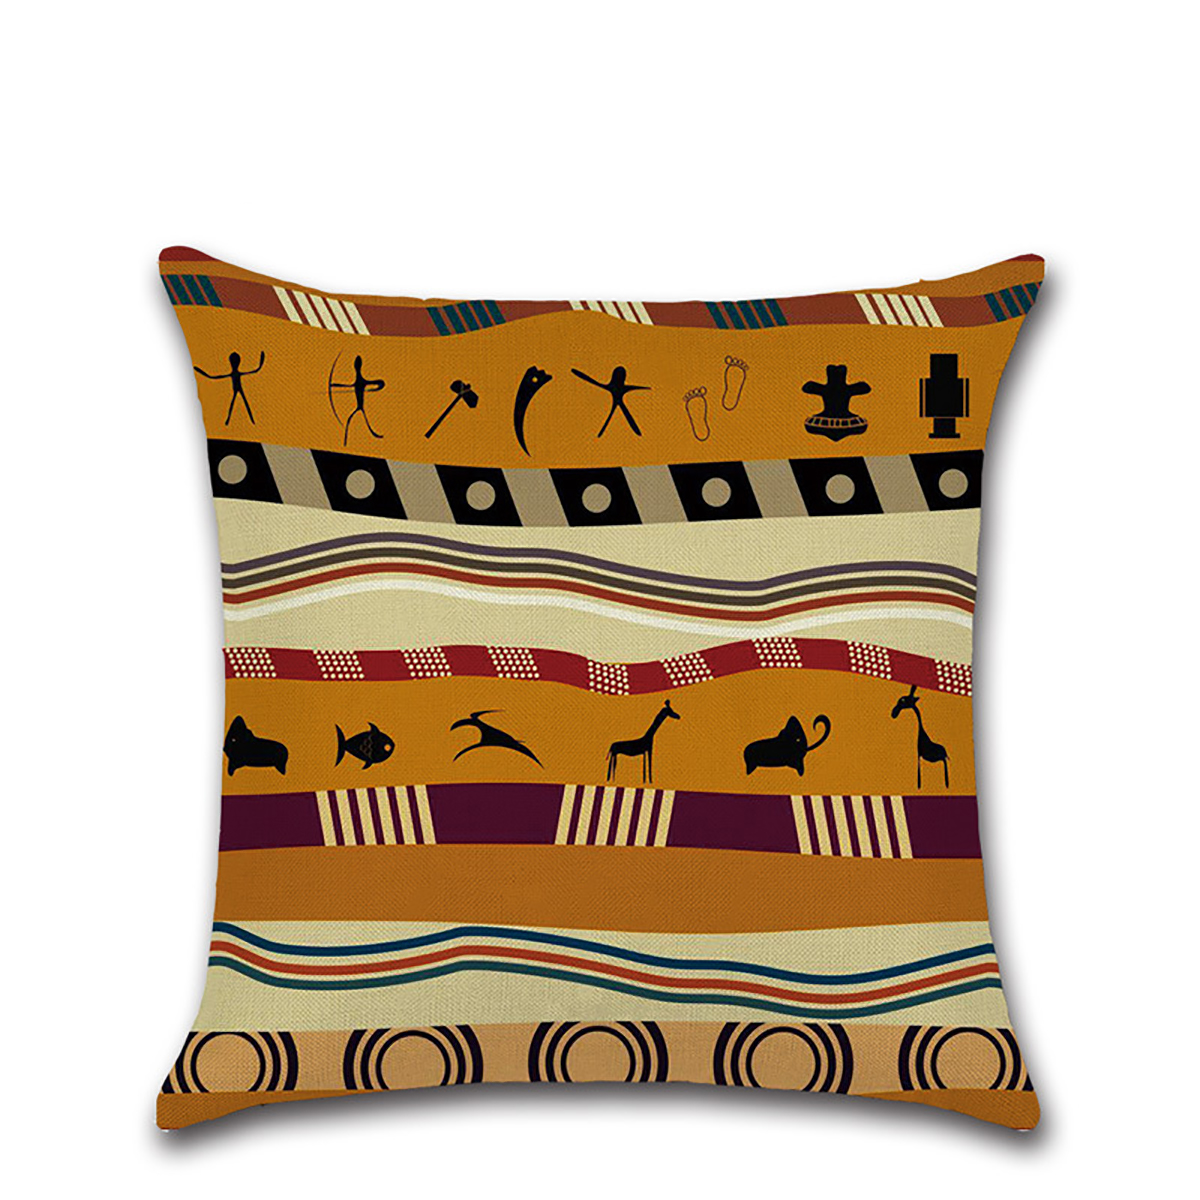 45x45CM-African-National-Style-Geometric-Printing-Cushion-Cover-Linen-Pillow-Case-Home-Decor-Pillow--1915524-3